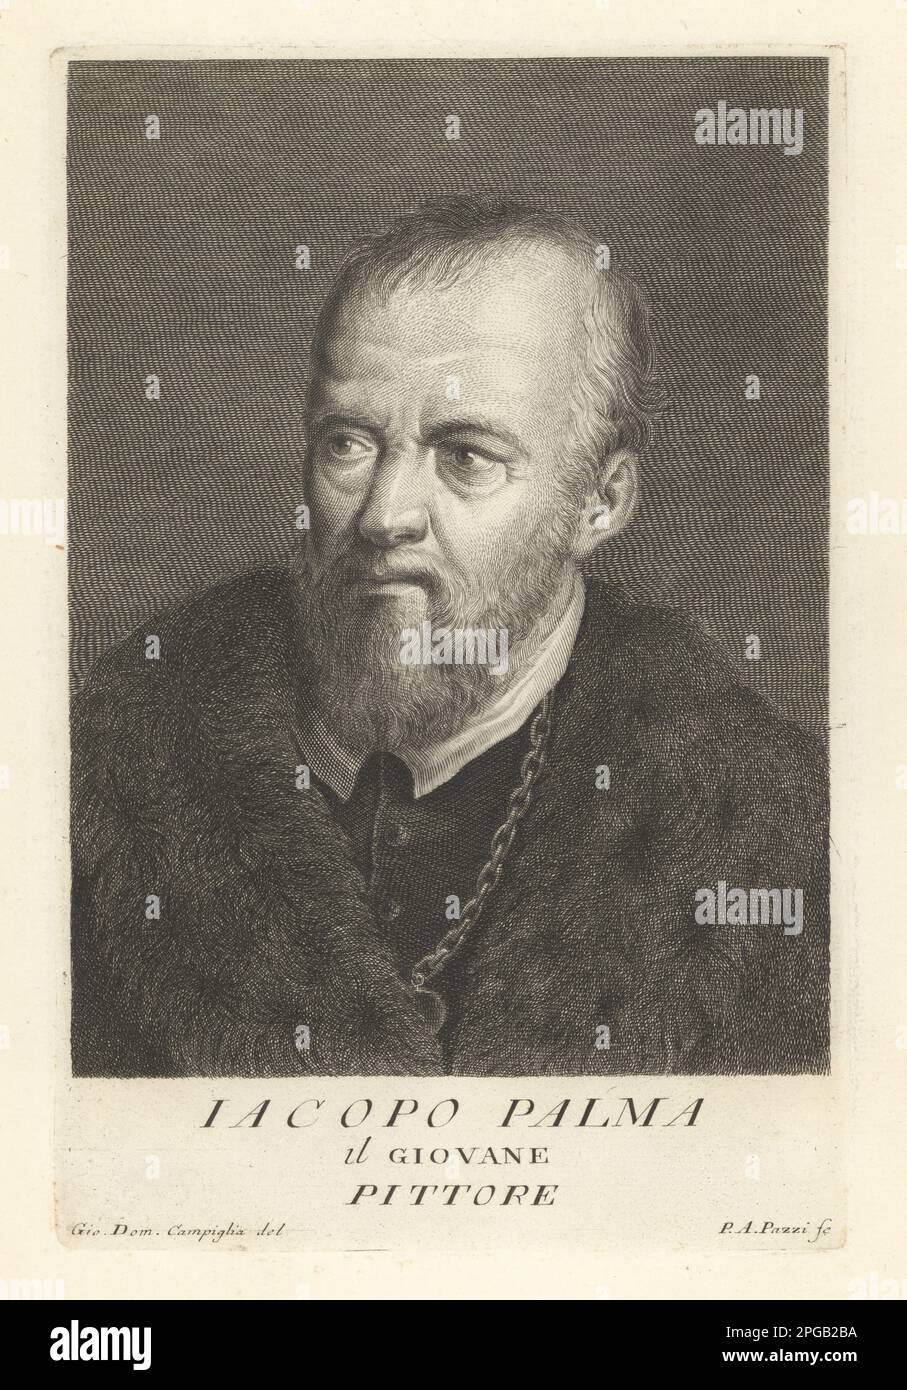 Jacopo Palma il Giovane, Italian painter from Venice, notable exponent of the Venetian school, 1544-1628. Iacopo Palma, Pittore. Copperplate engraving by Pietro Antonio Pazzi after Giovanni Domenico Campiglia after a self portrait by the artist from Francesco Moucke's Museo Florentino (Museum Florentinum), Serie di Ritratti de Pittori (Series of Portraits of Painters) stamperia Mouckiana, Florence, 1752-62. Stock Photo